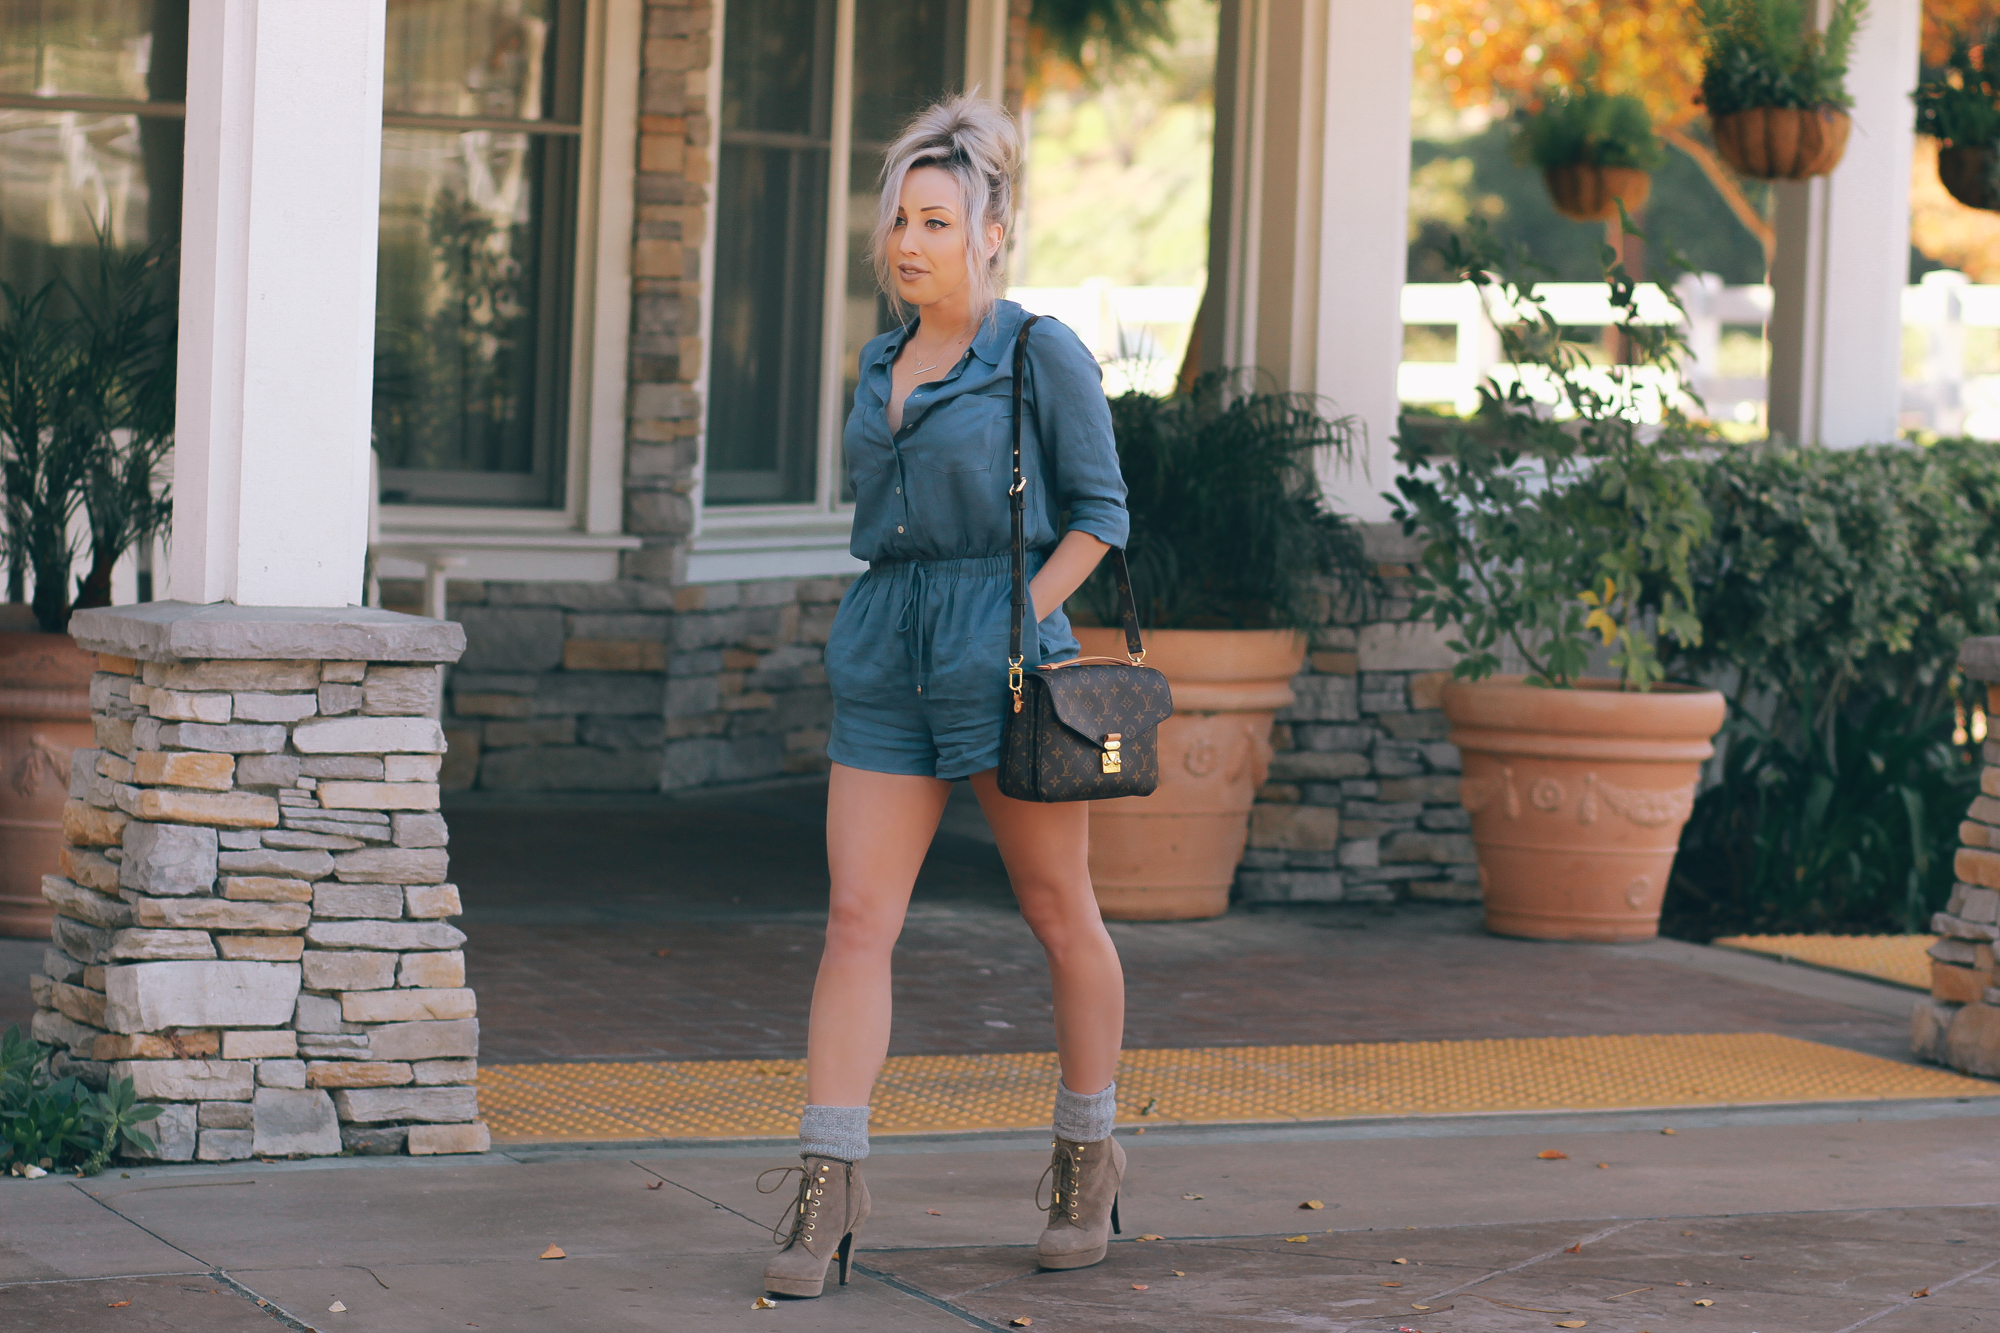 Blondie in the City | Blue Button Up Romper and Socks with Booties | Louis Vuitton Pochette Metis